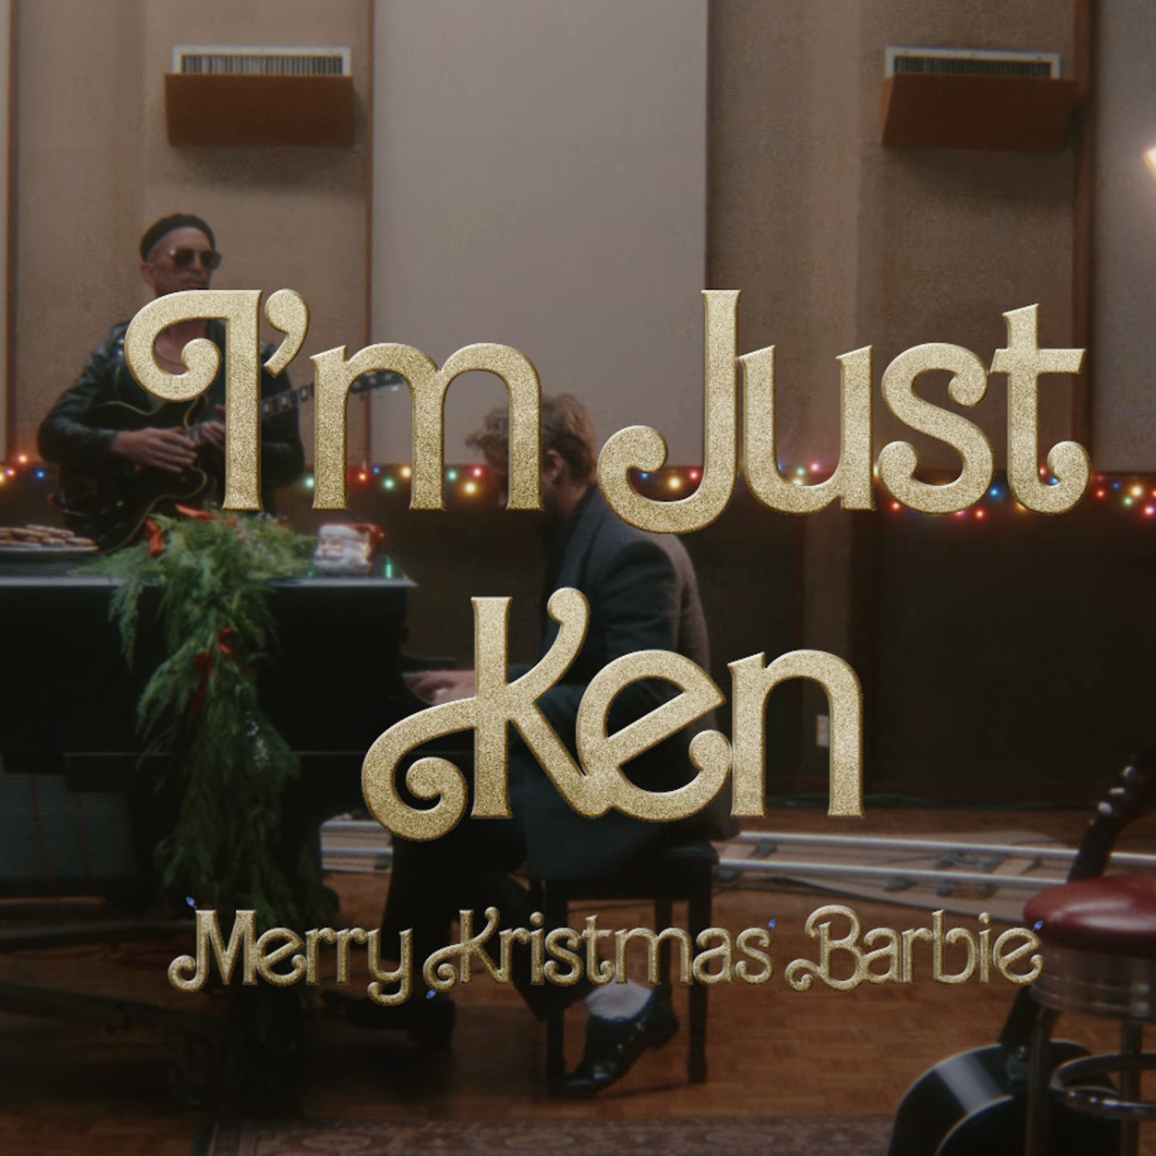 Ryan Gosling Releases Holiday Version Of 'I'm Just Ken